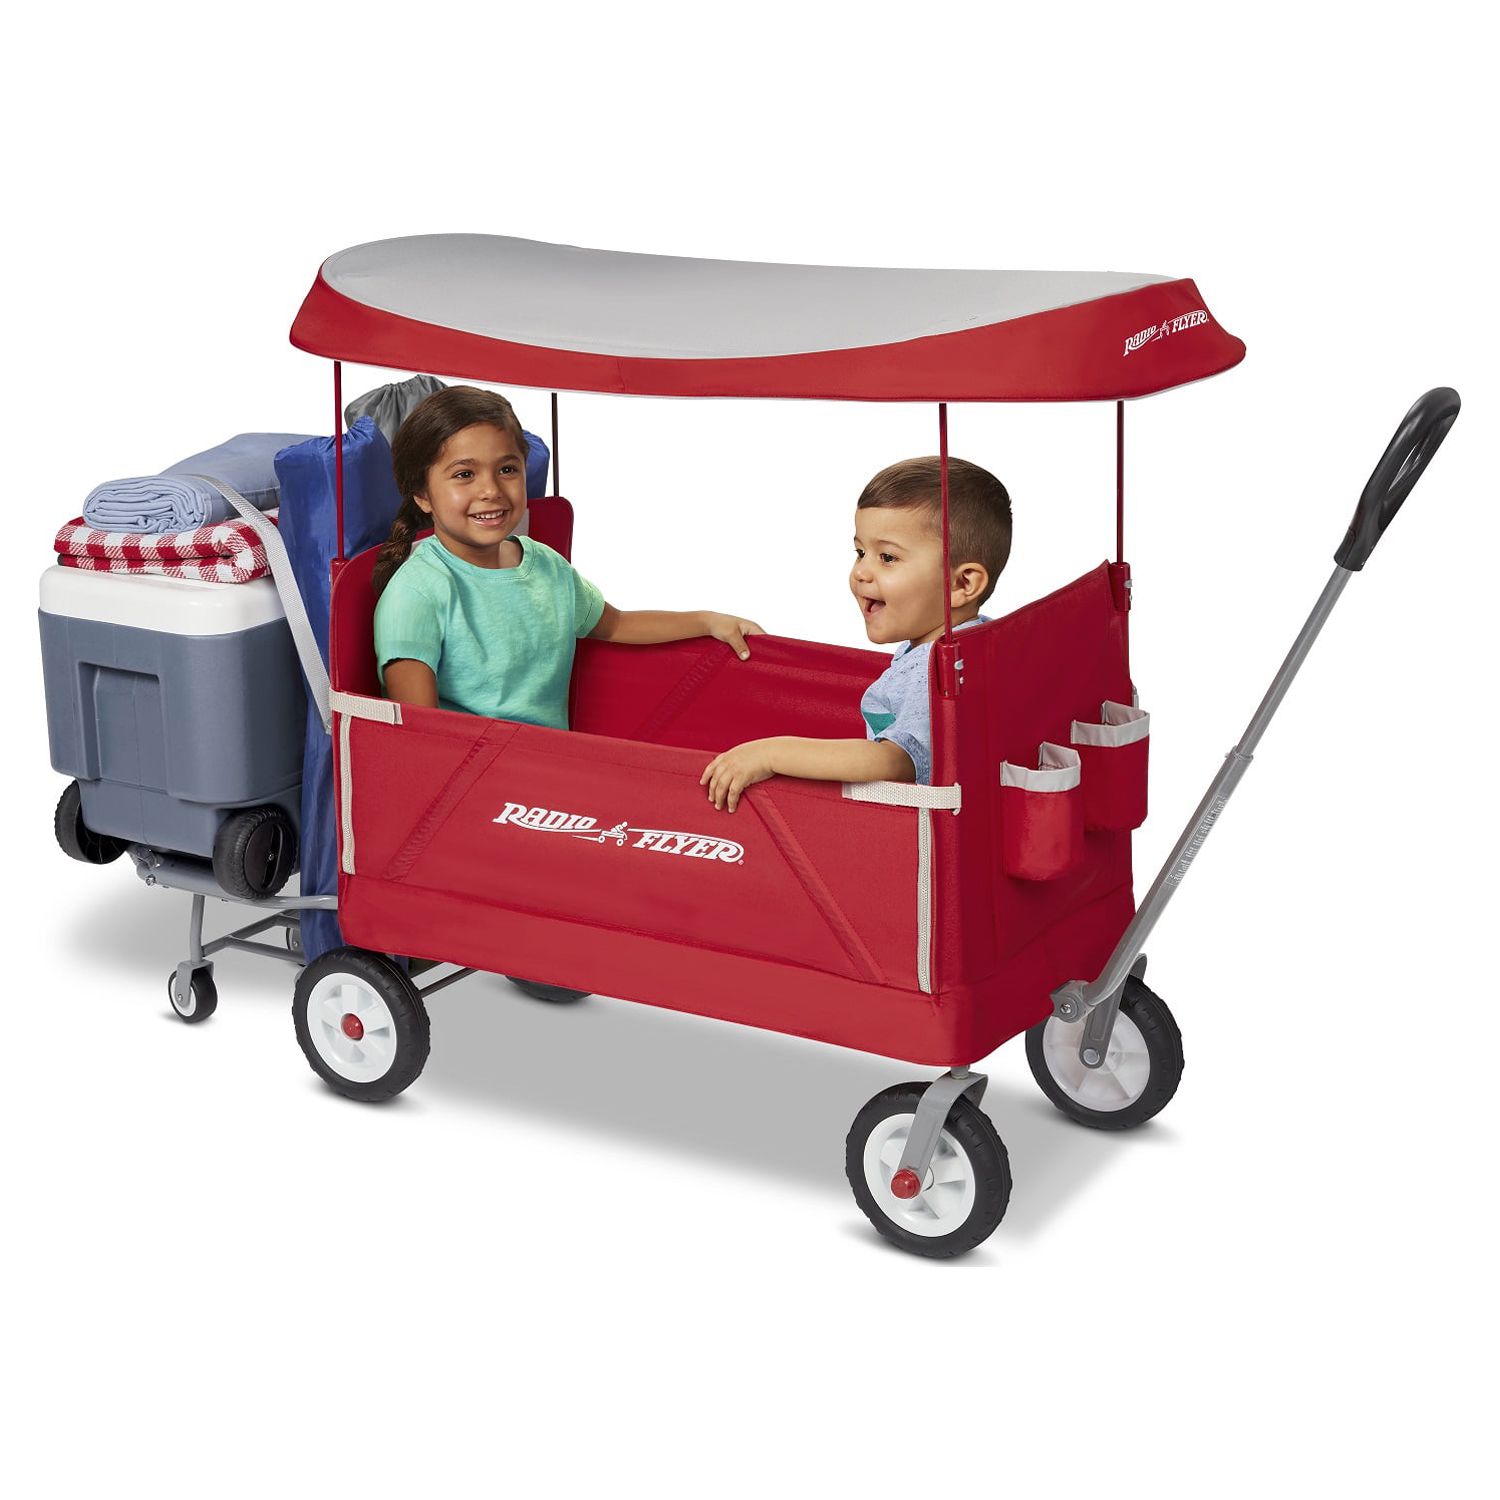 Radio Flyer, 3-in-1 Tailgater Wagon with Canopy, Folding Wagon, Red - image 2 of 20